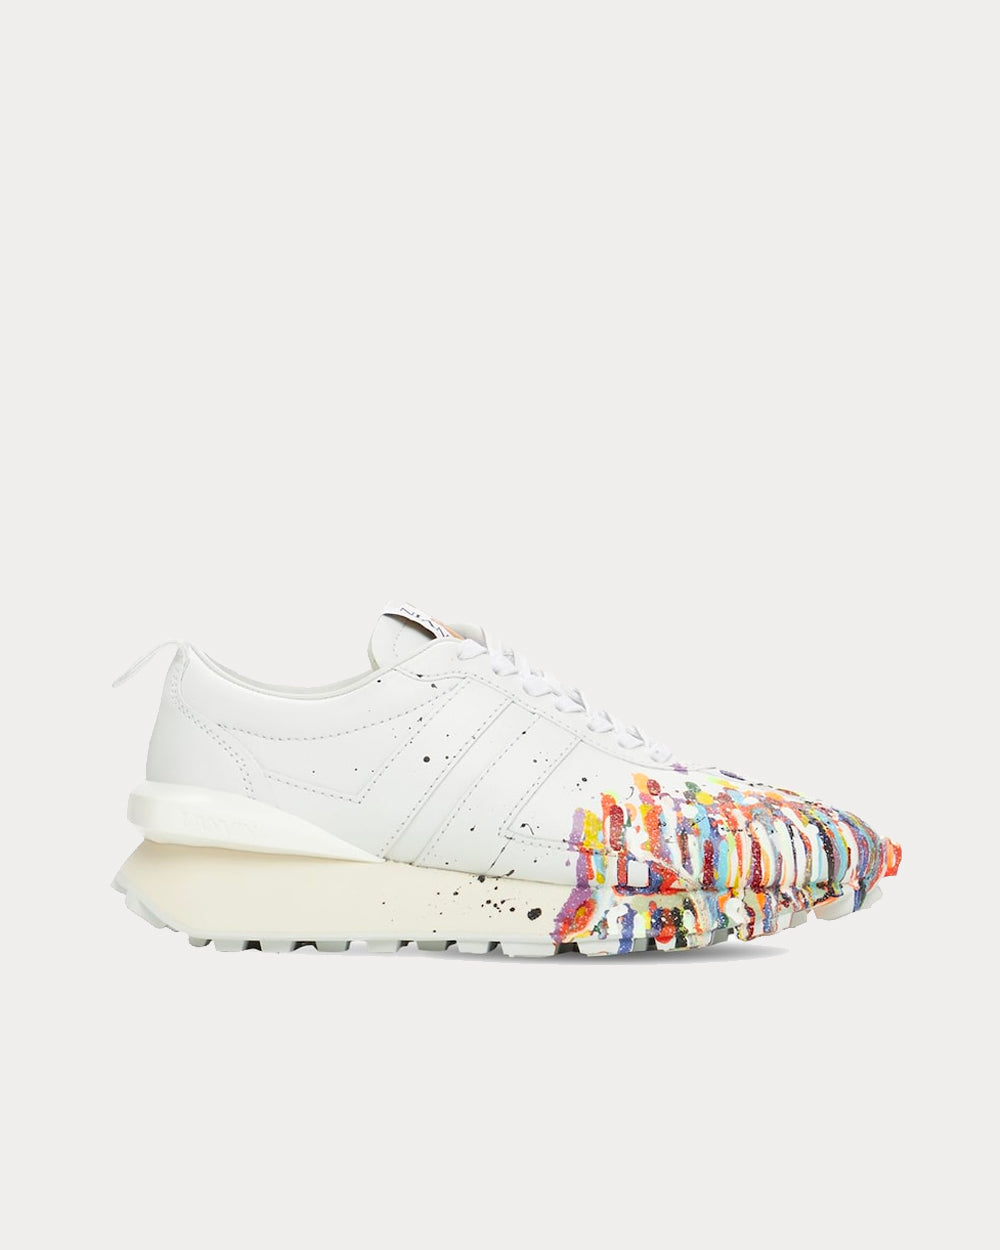 Lanvin x Gallery Dept - BumpR Painted White Low Top Sneakers